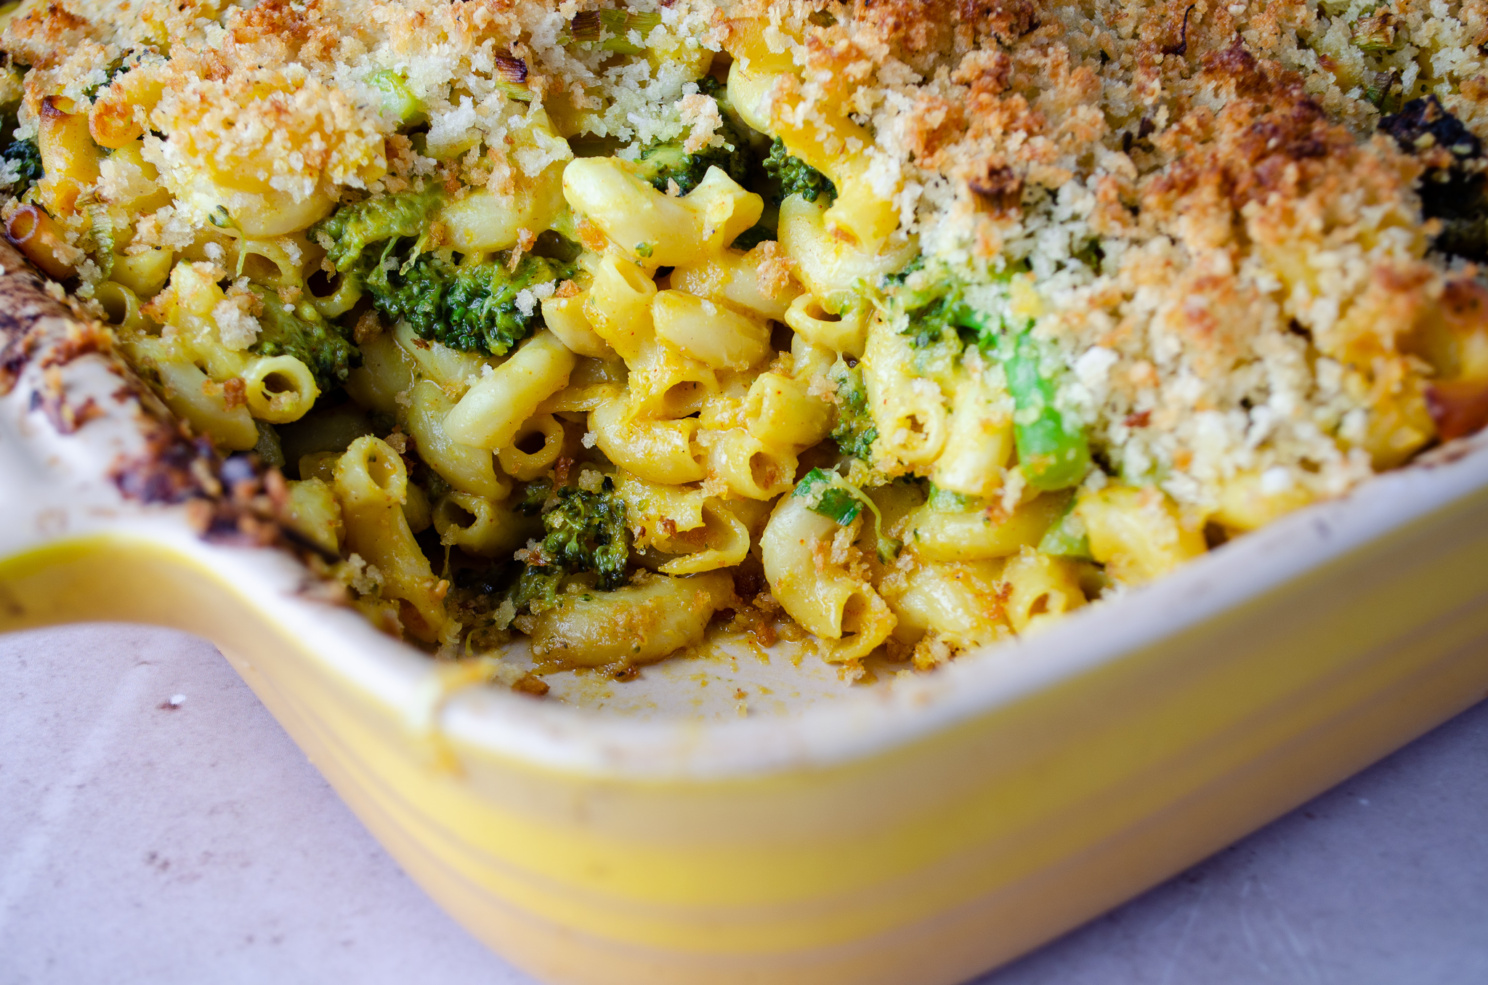 A dish of creamy and cheesy dairy-free, vegan mac and cheese with a crusty breadcrumb topping and broccoli